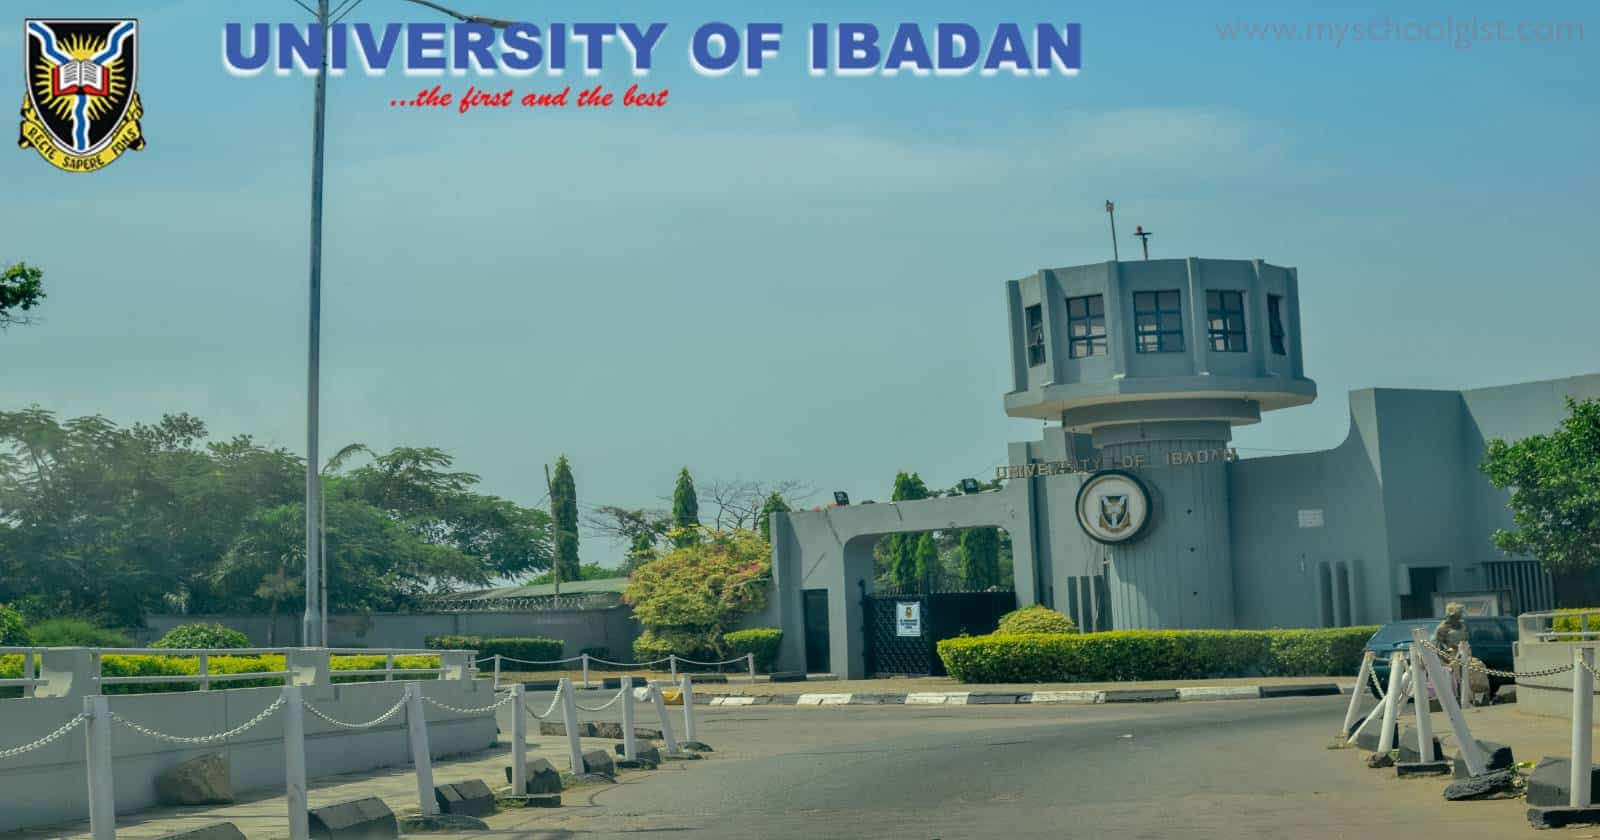 University of Ibadan (UI) 2022 Convocation and 74th Founders’ Day Ceremonies Schedule